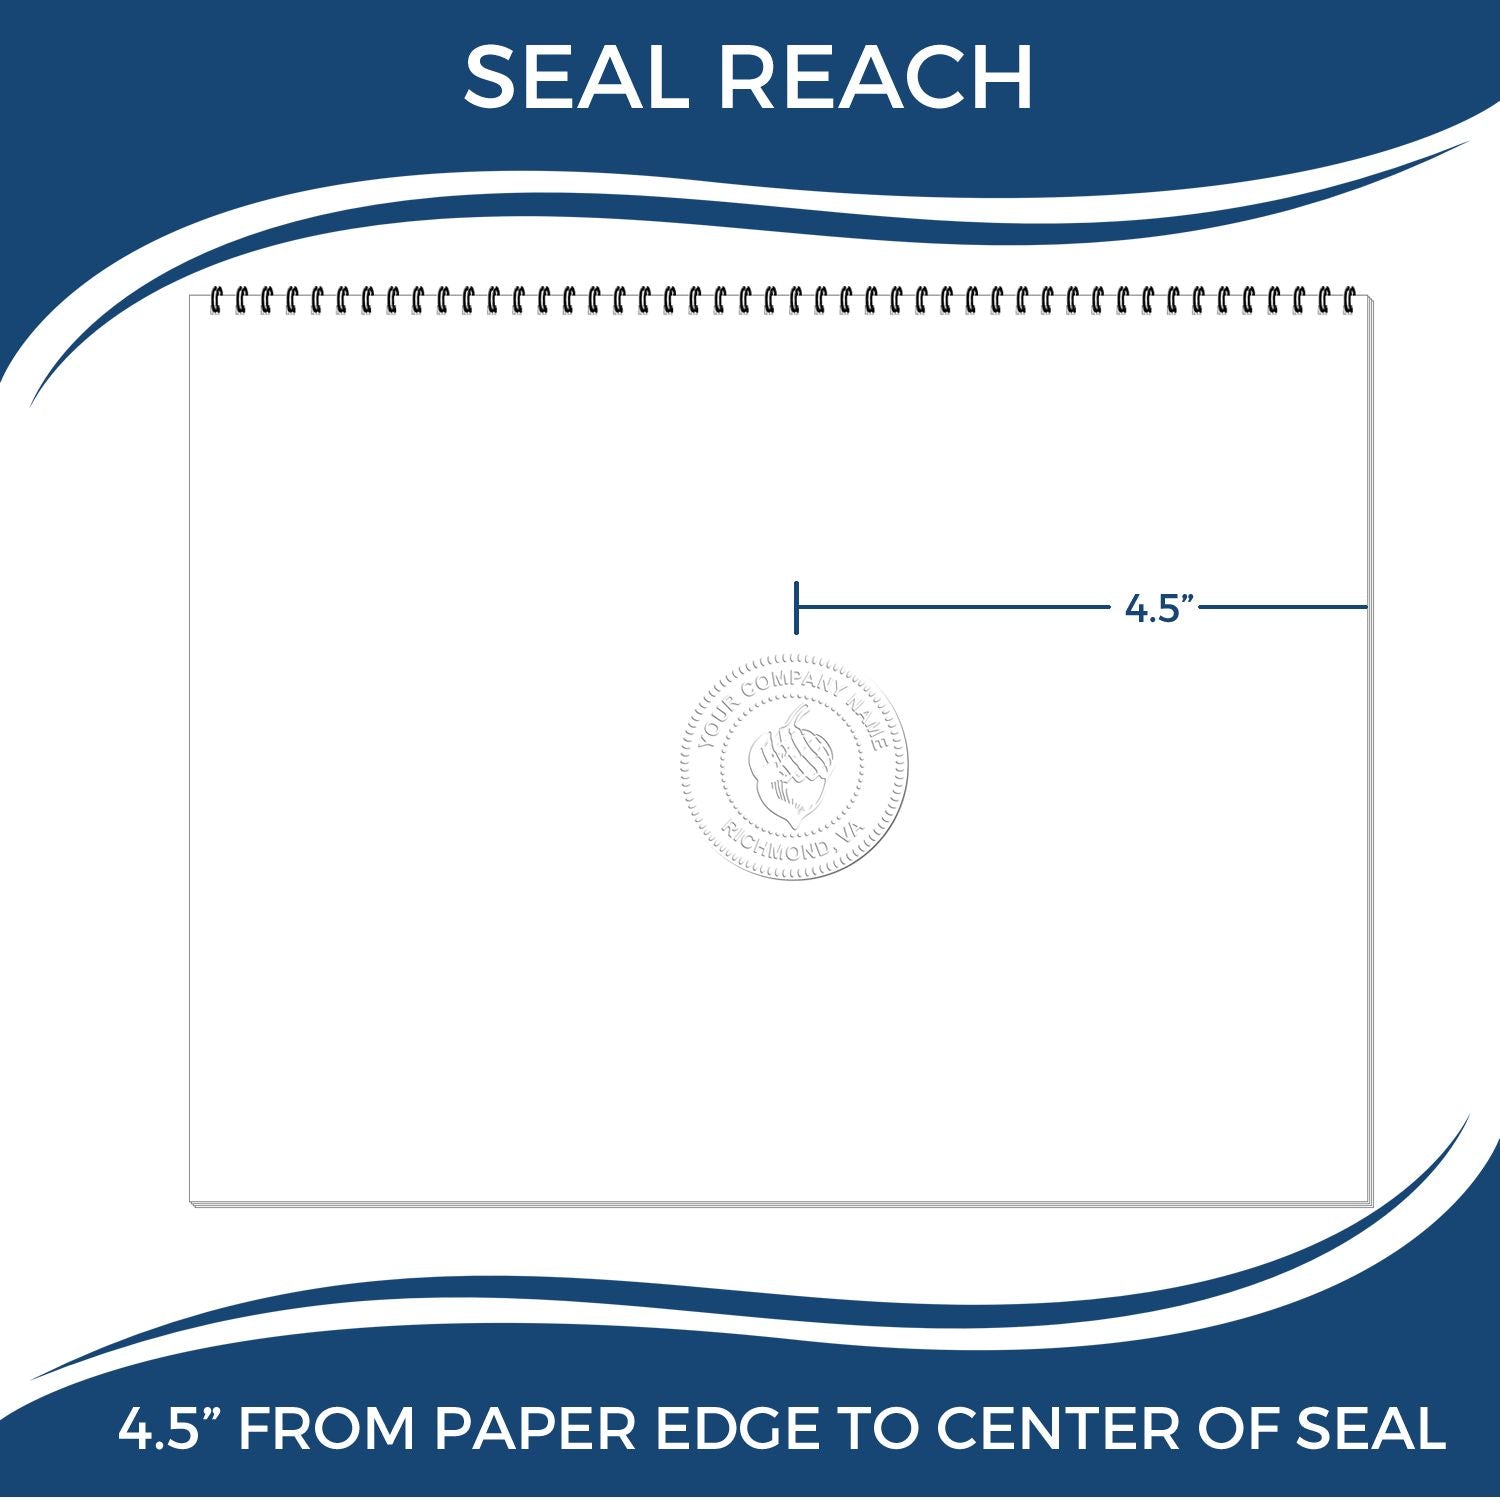 An infographic showing the seal reach which is represented by a ruler and a miniature seal image of the State of Utah Extended Long Reach Engineer Seal